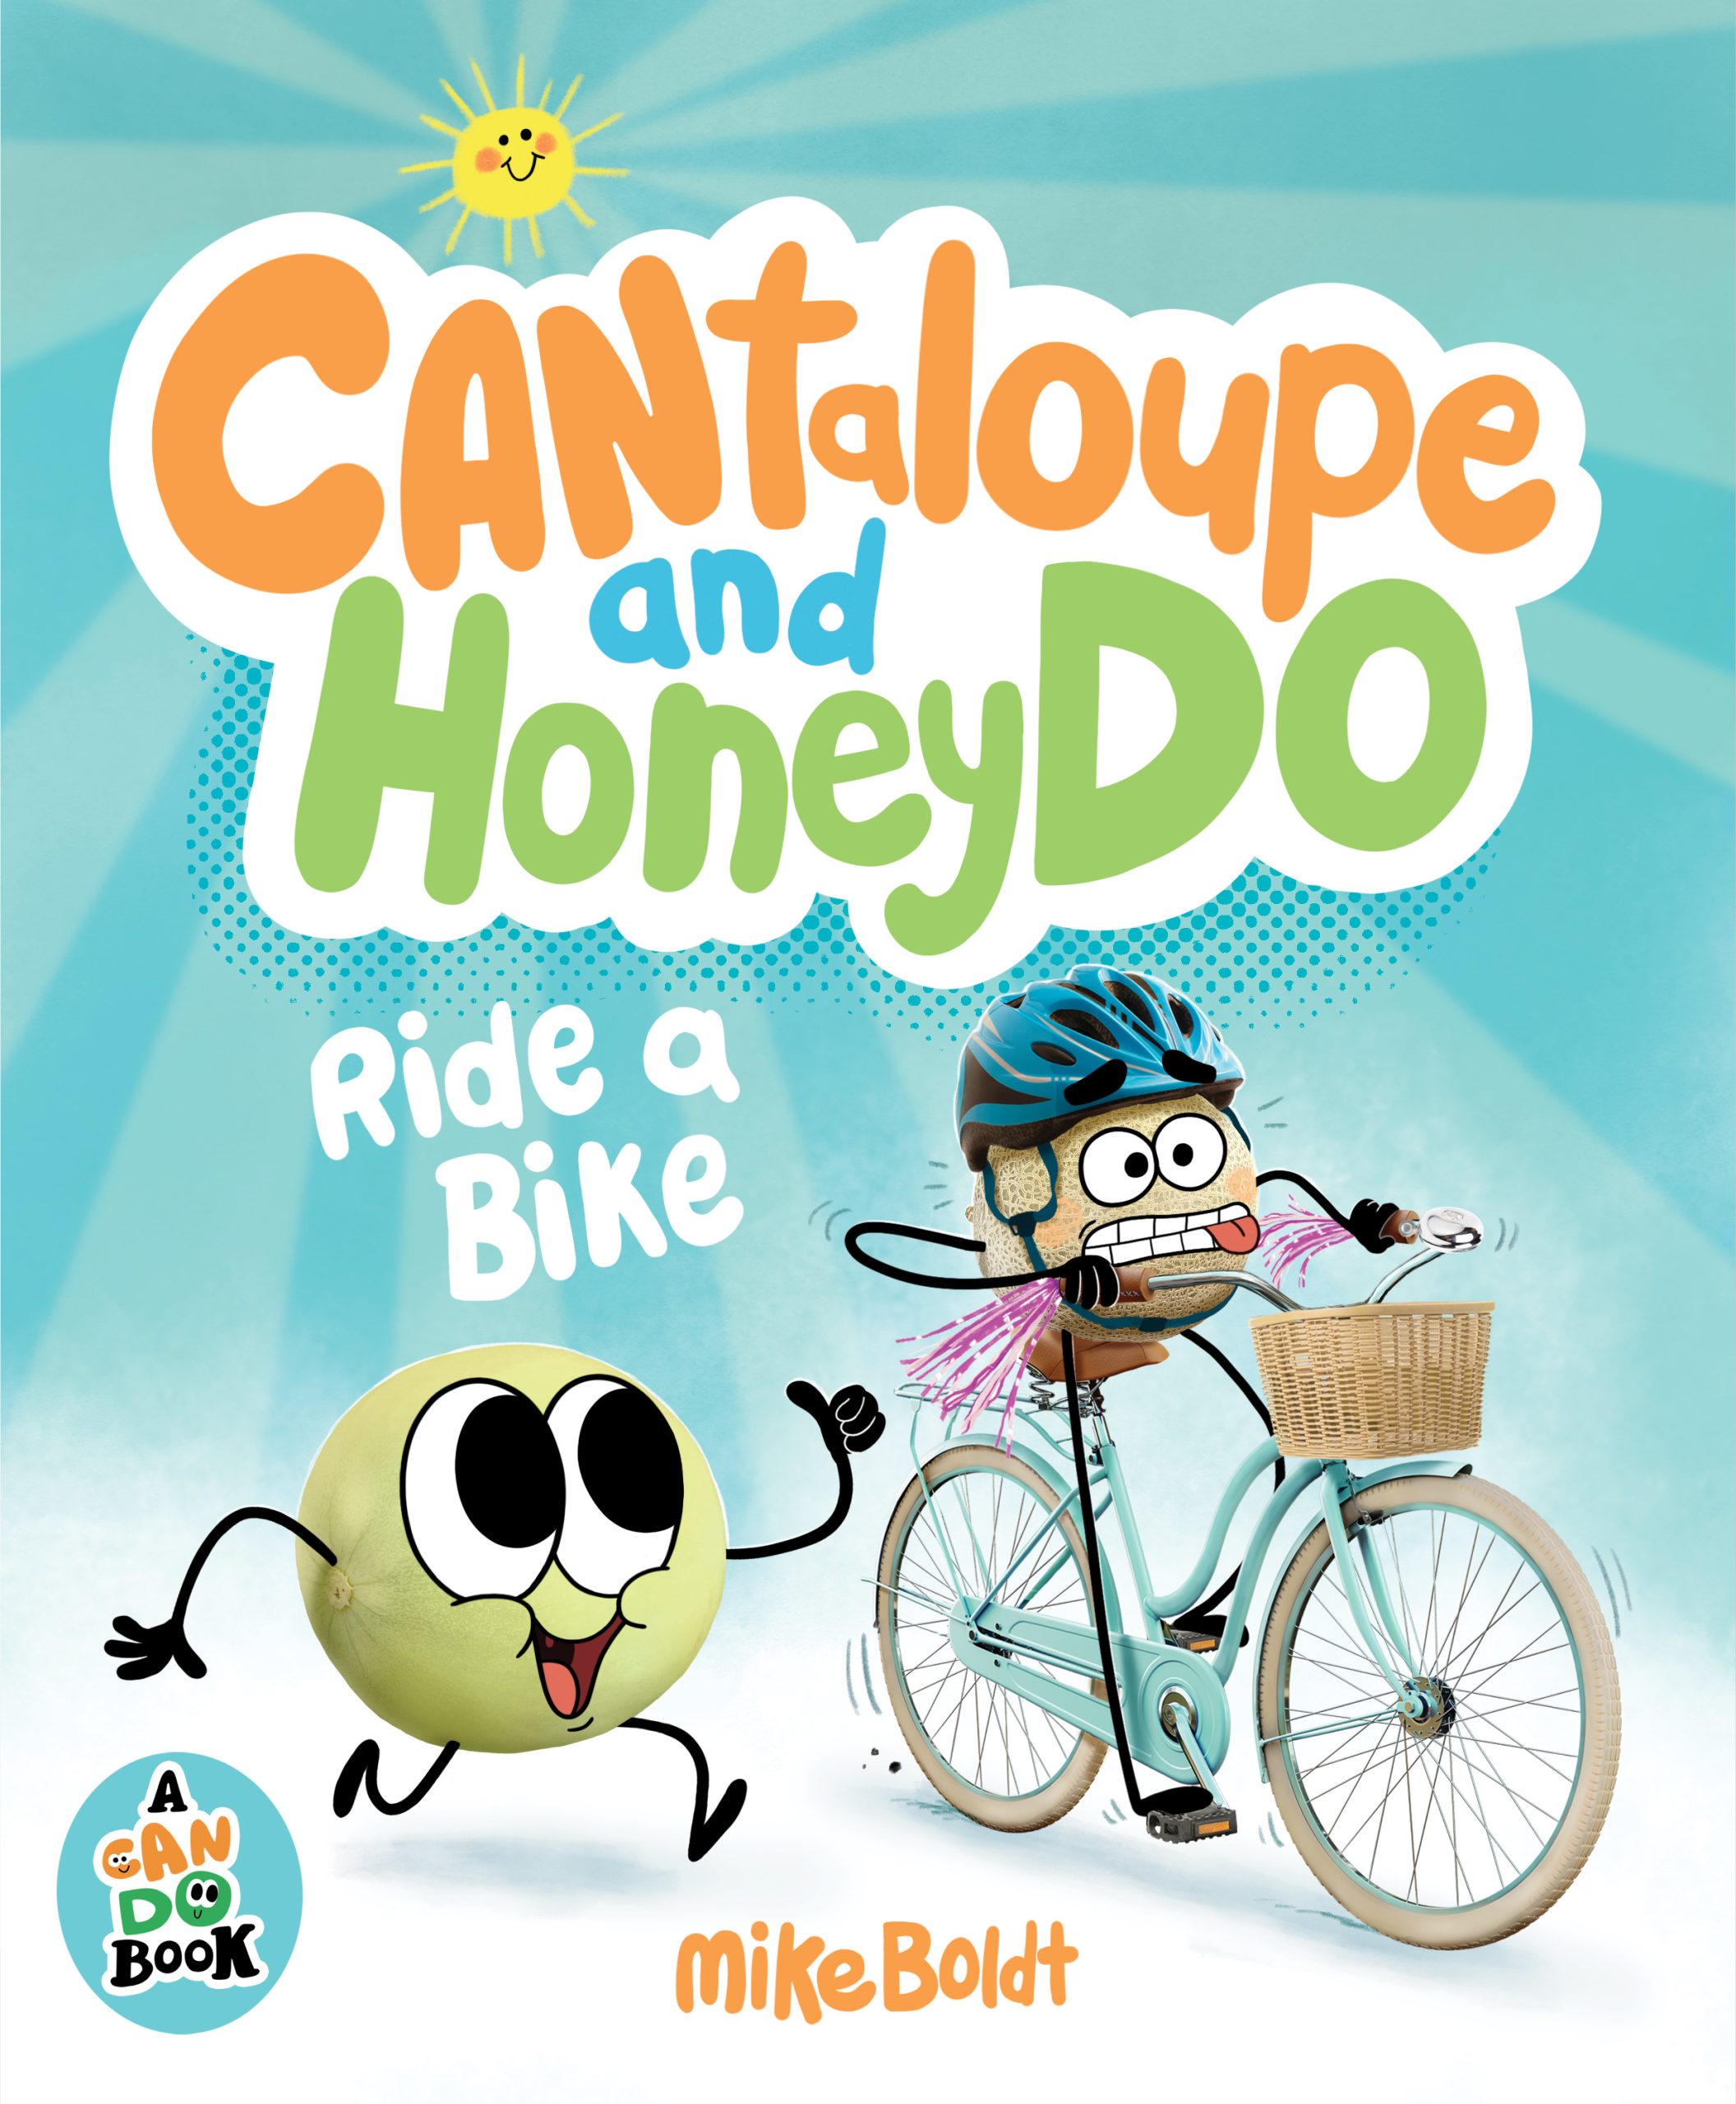 Author Chat with Mike Boldt (CAN DO: CANTALOUPE AND HONEYDO RIDE A BIKE), Plus Giveaway! ~ US ONLY!